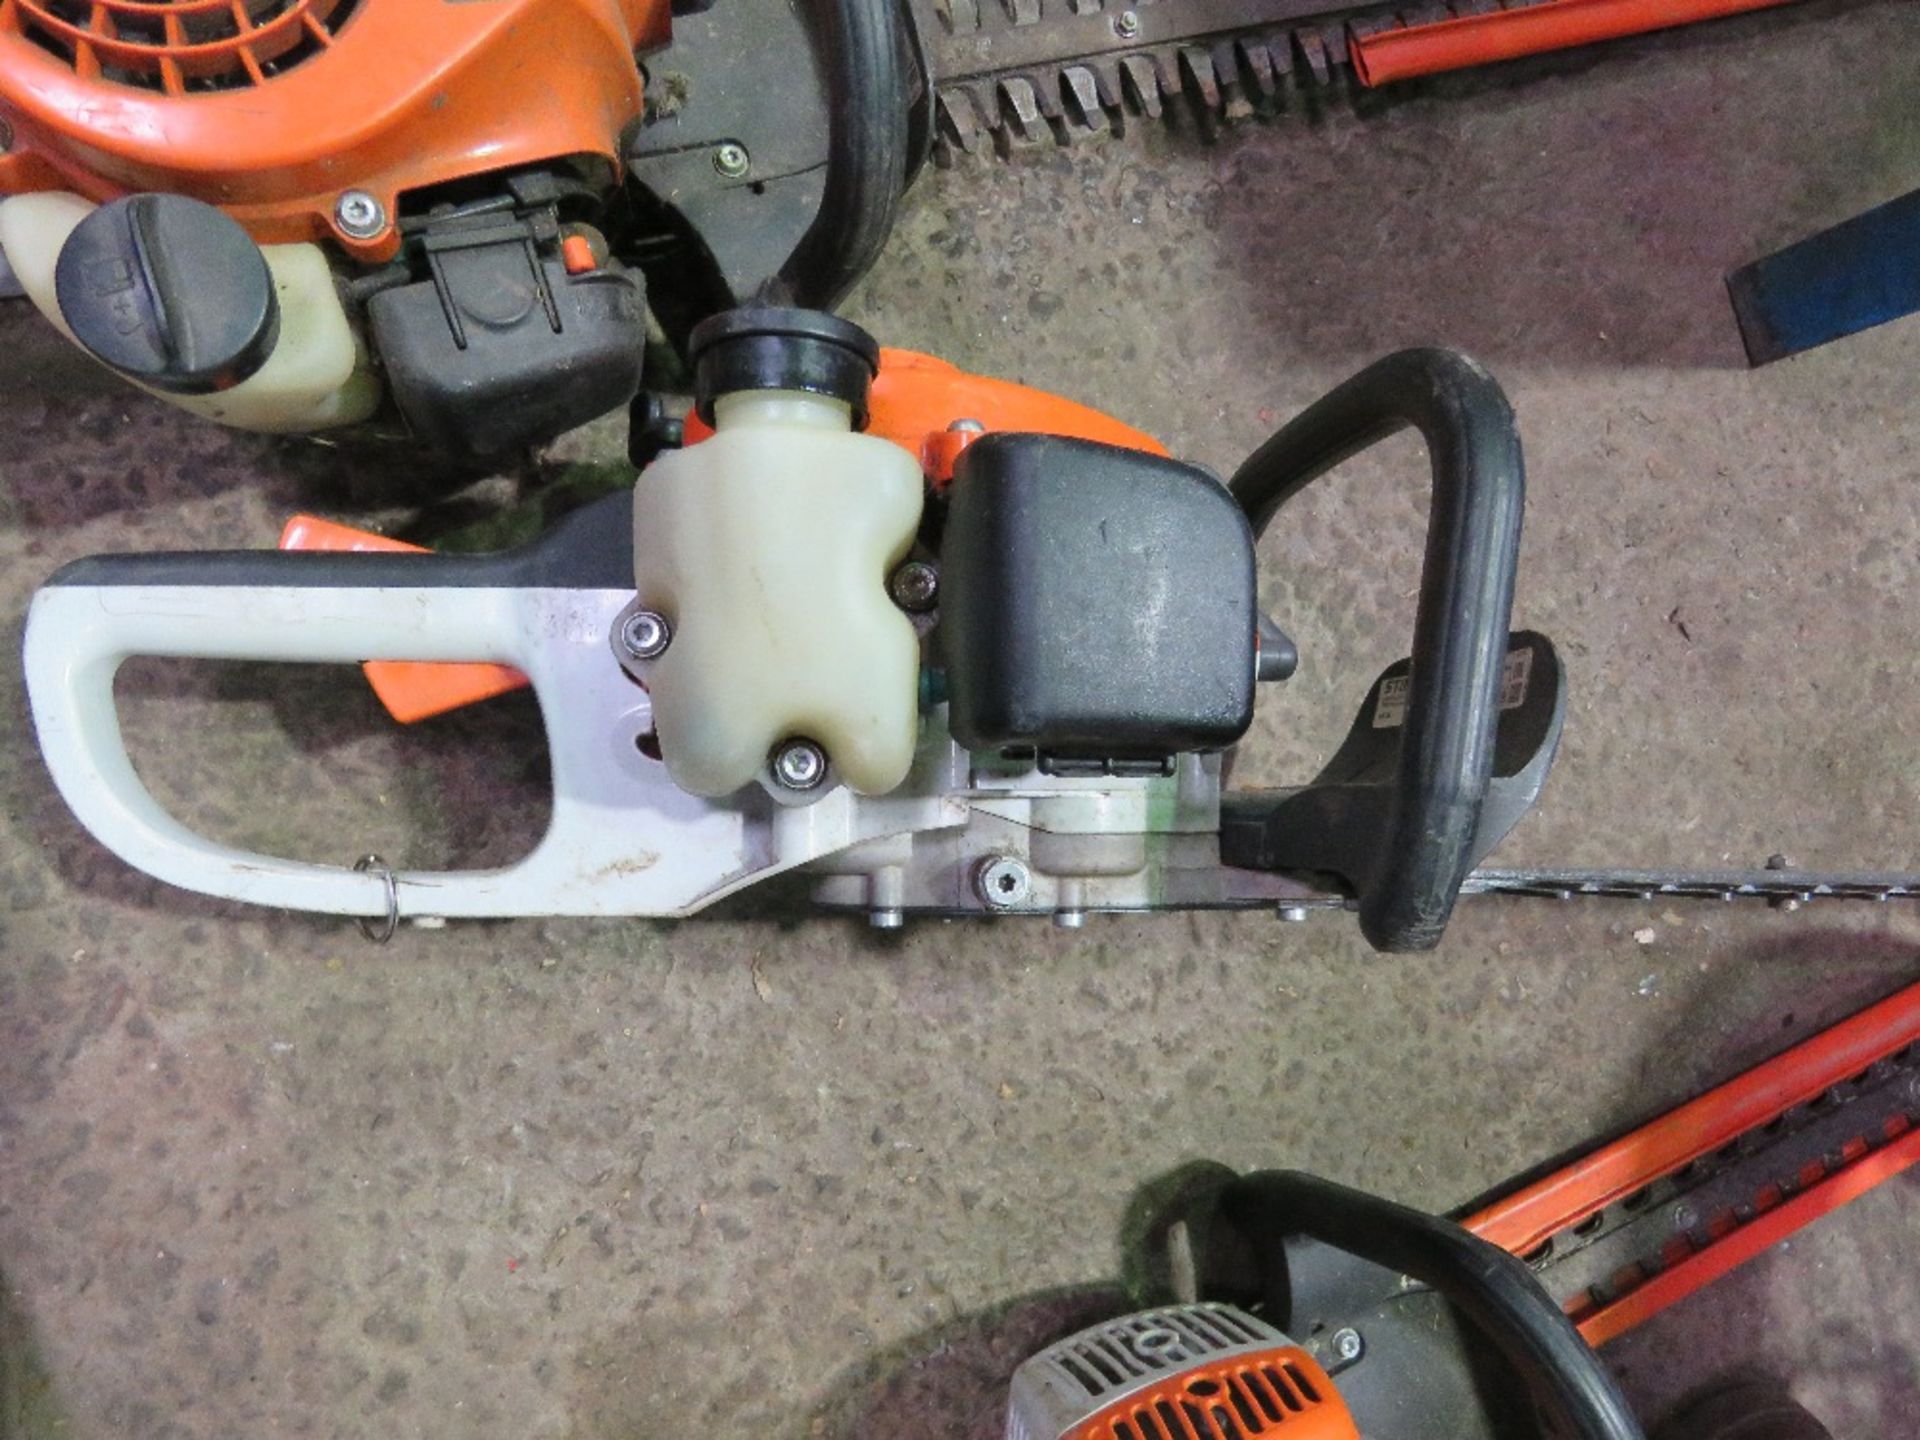 STIHL HS45 PETROL ENGINED PROFESSIONAL HEDGE CUTTER. DIRECT FROM LOCAL LANDSCAPE COMPANY WHO ARE CLO - Image 3 of 5